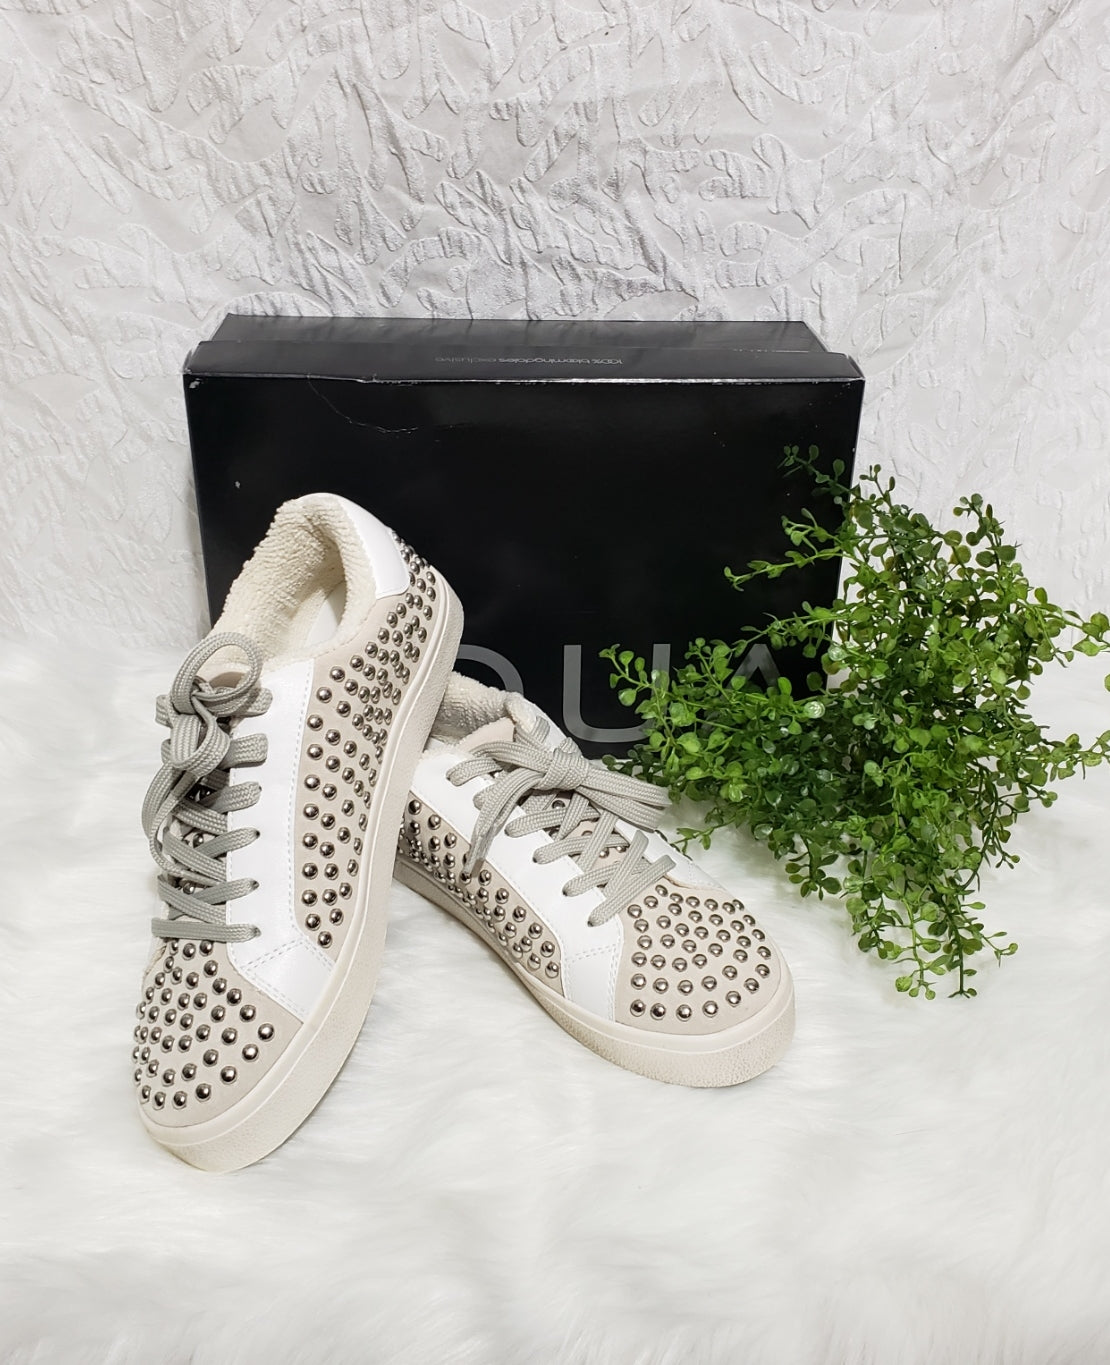 Aqua Tess Lace-Up Stud Embellished Sneakers - White